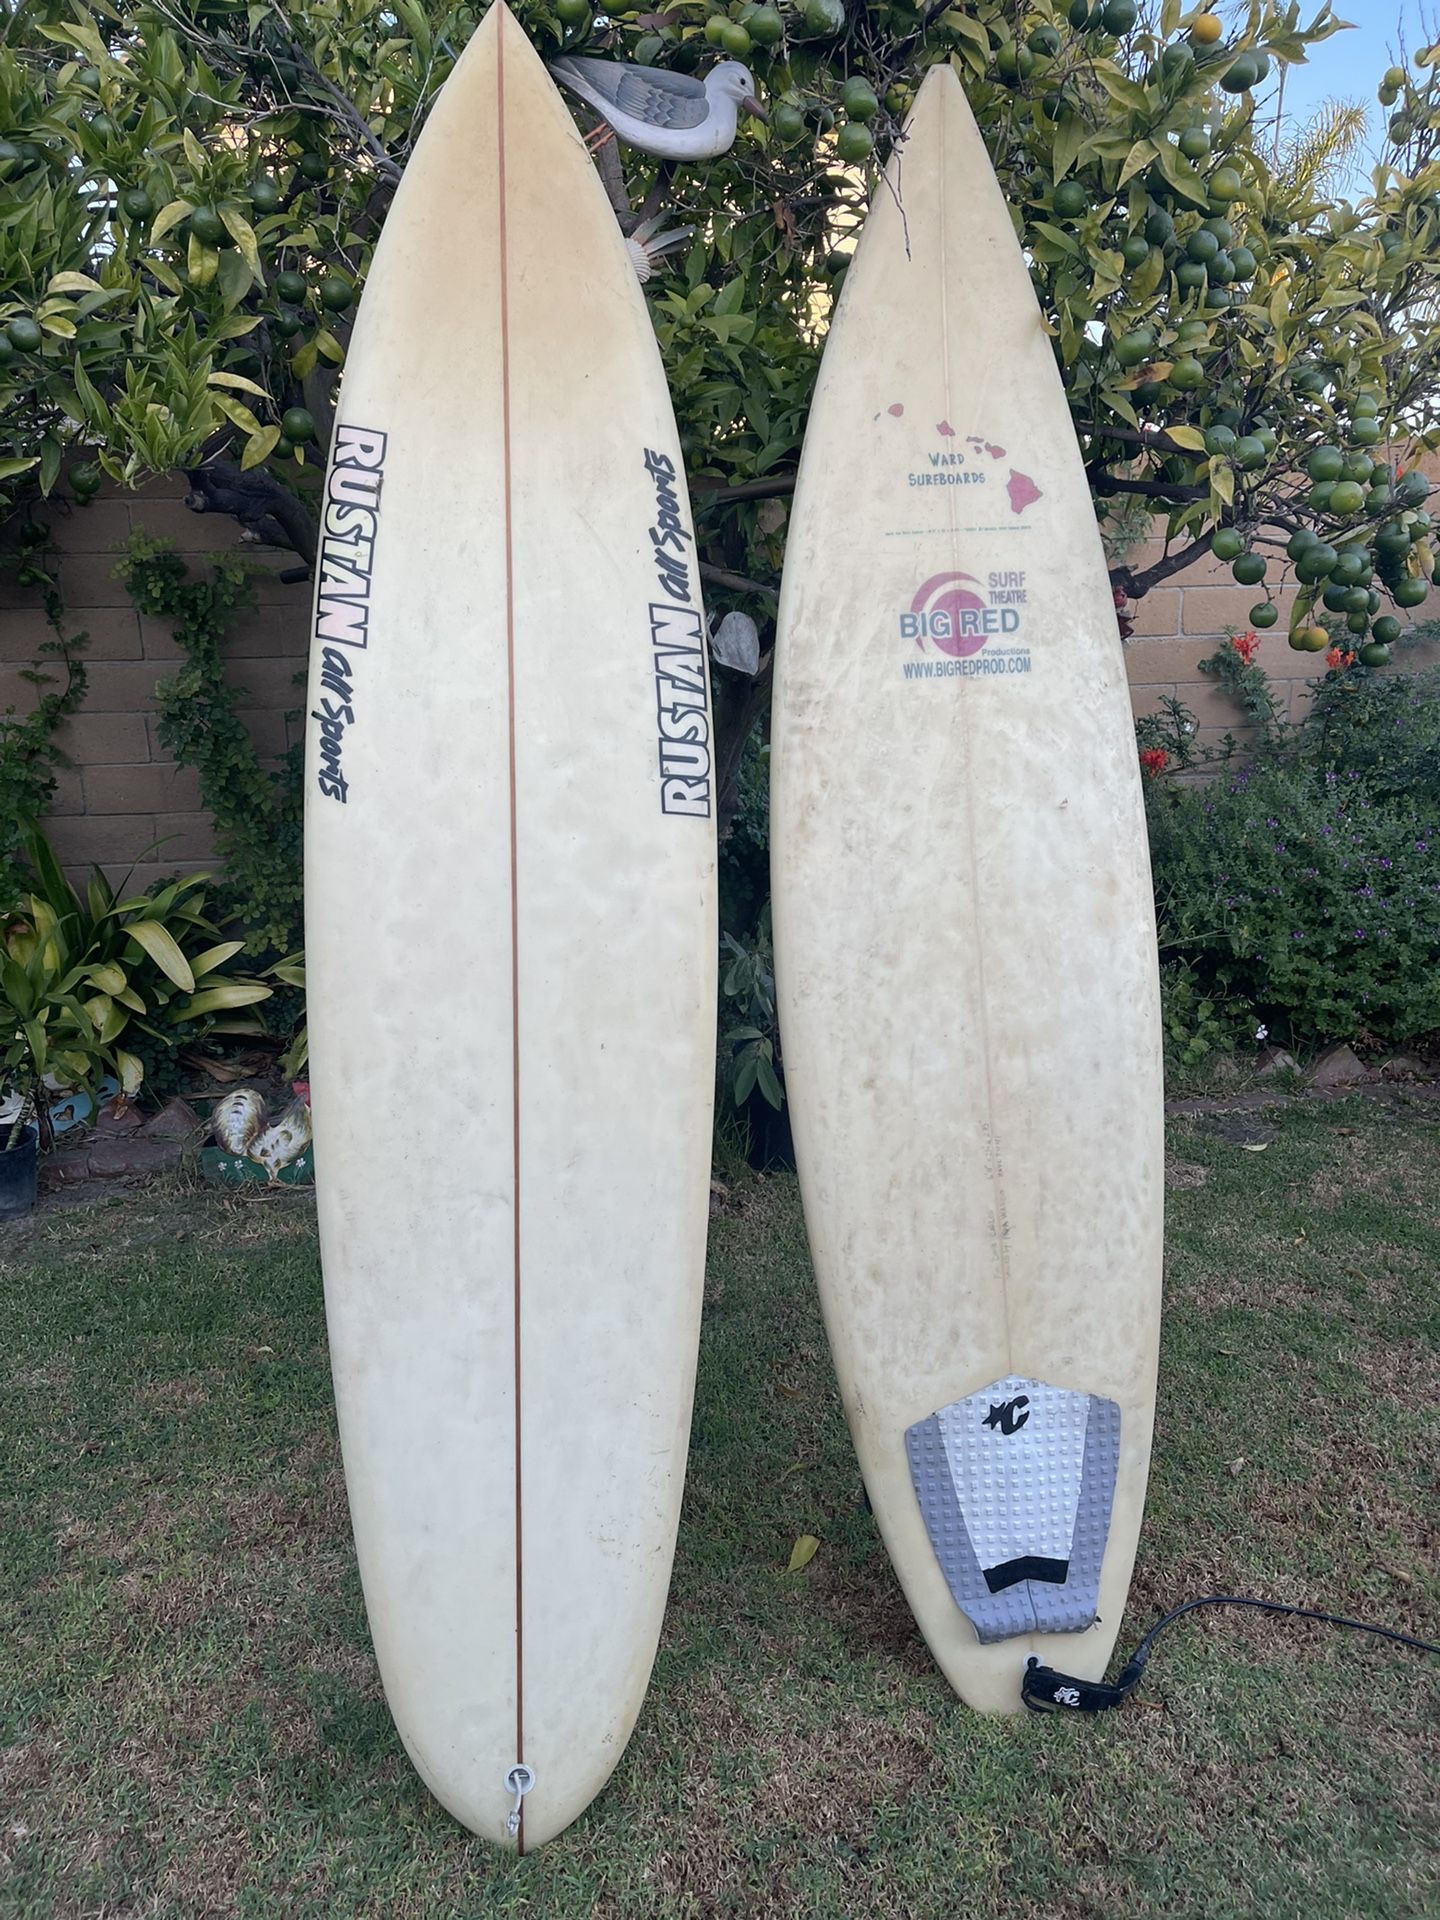 Surfboards 7.1”  And 6.11 Great,  Per Each 